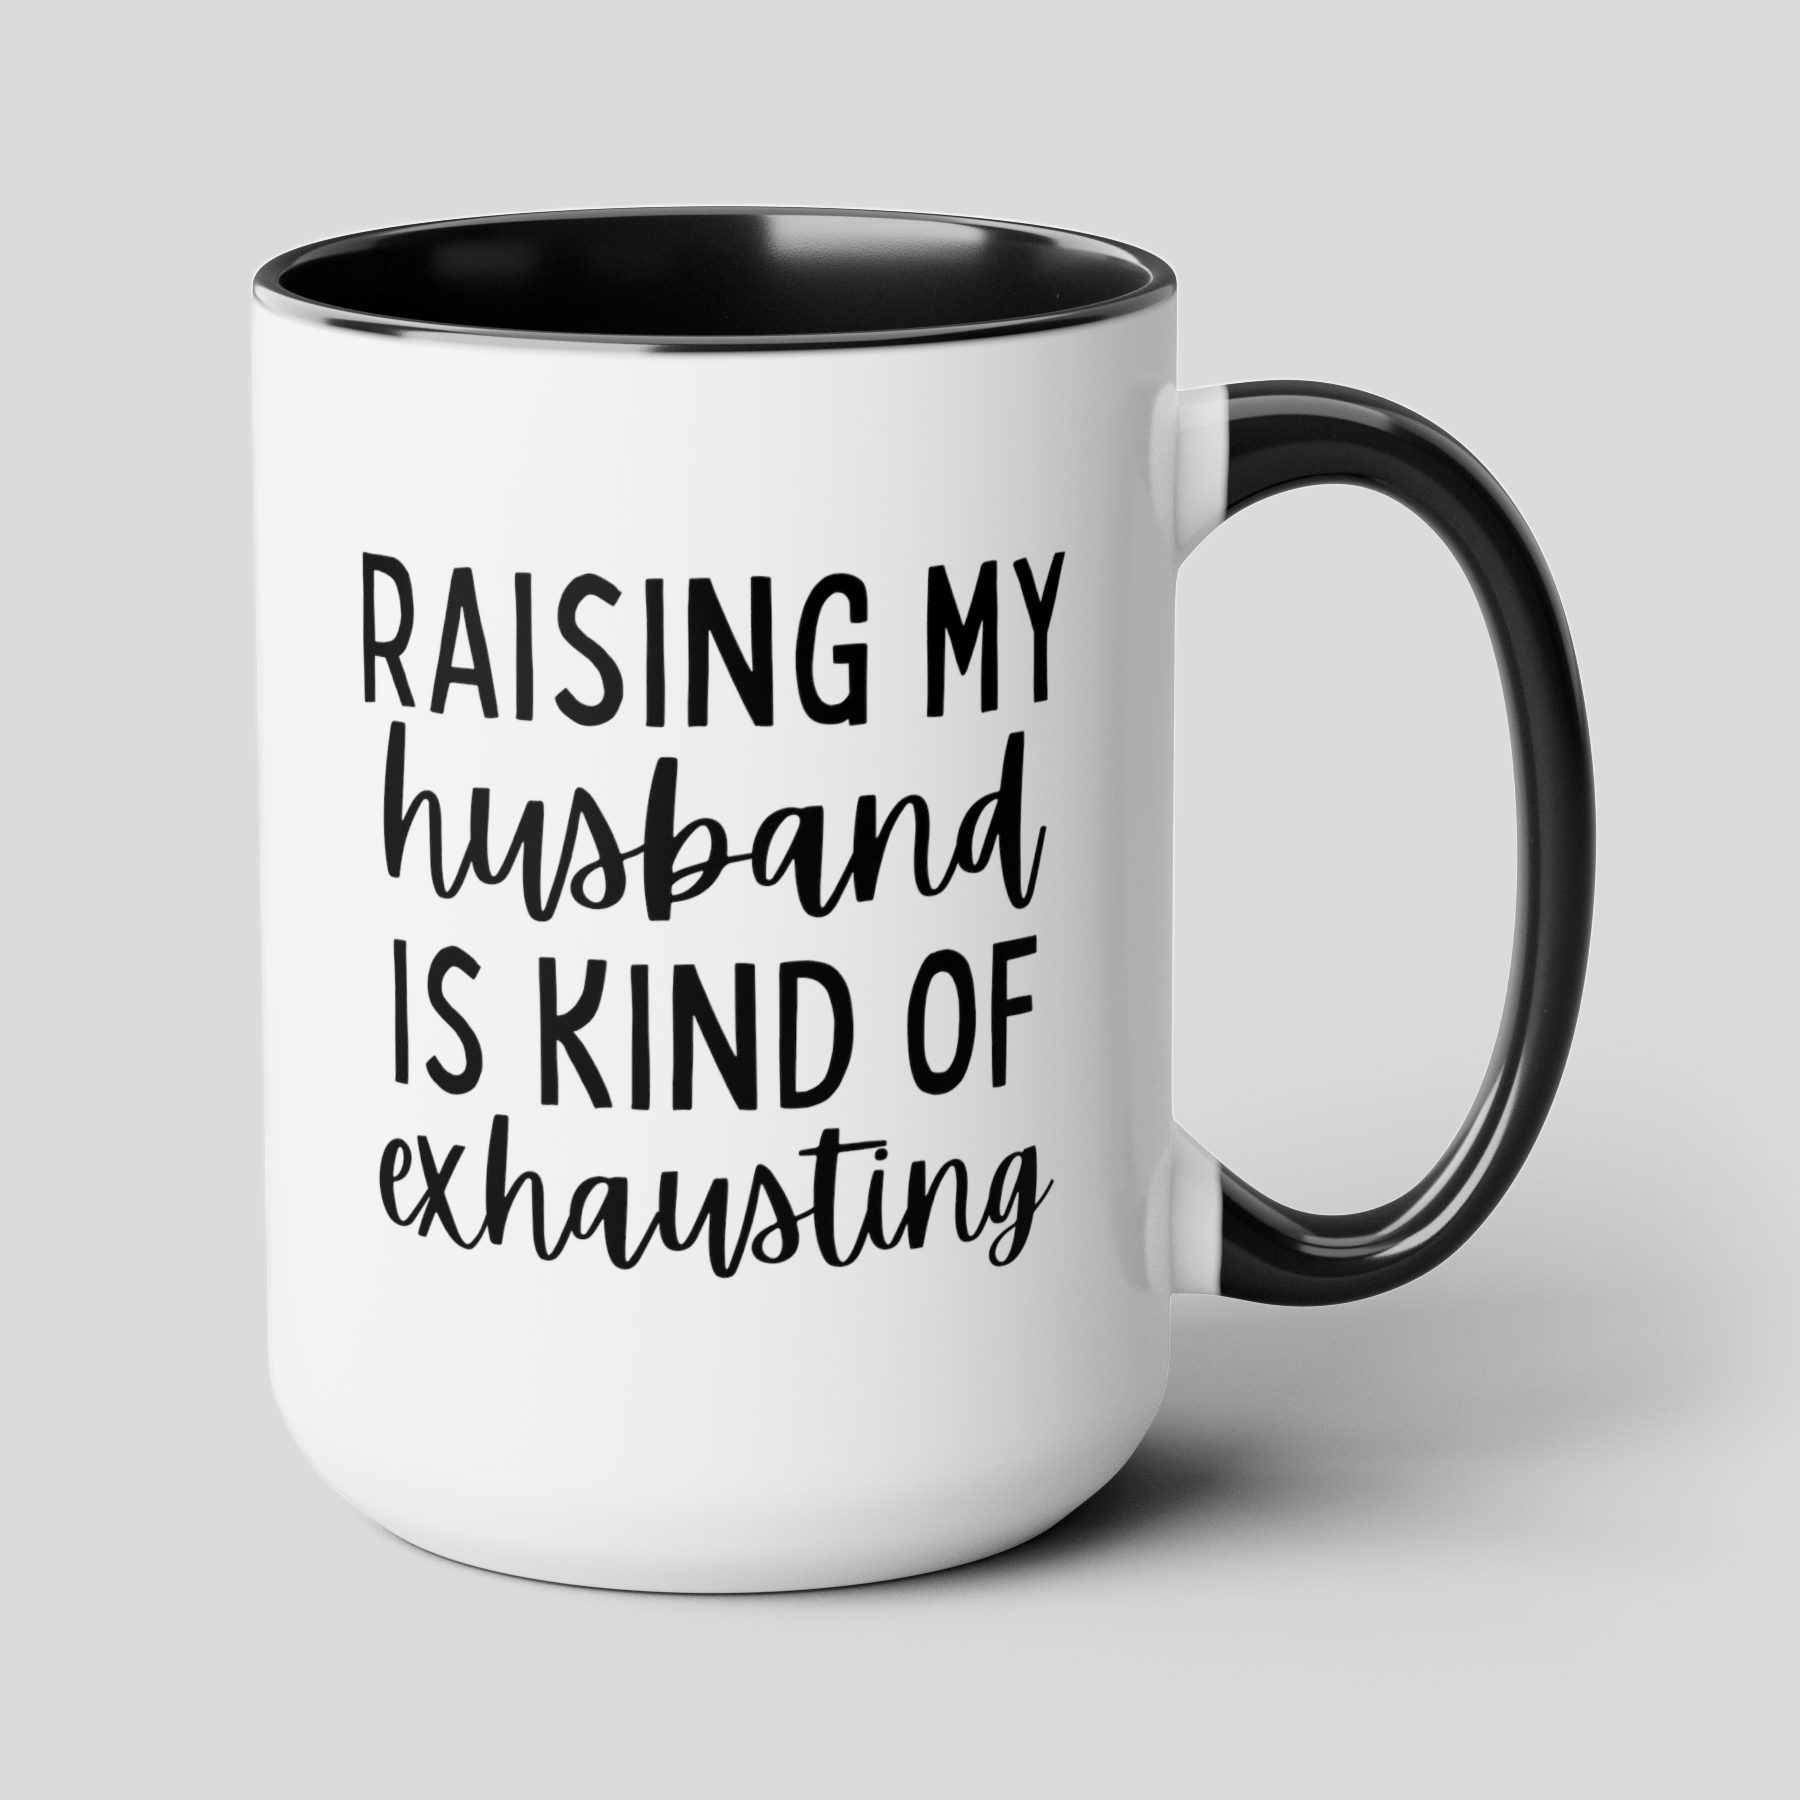 Raising My Husband is Kind of Exhausting 15oz white with black accent funny large coffee mug gift for wife mom bestie best friend sarcastic quote waveywares wavey wares wavywares wavy wares cover